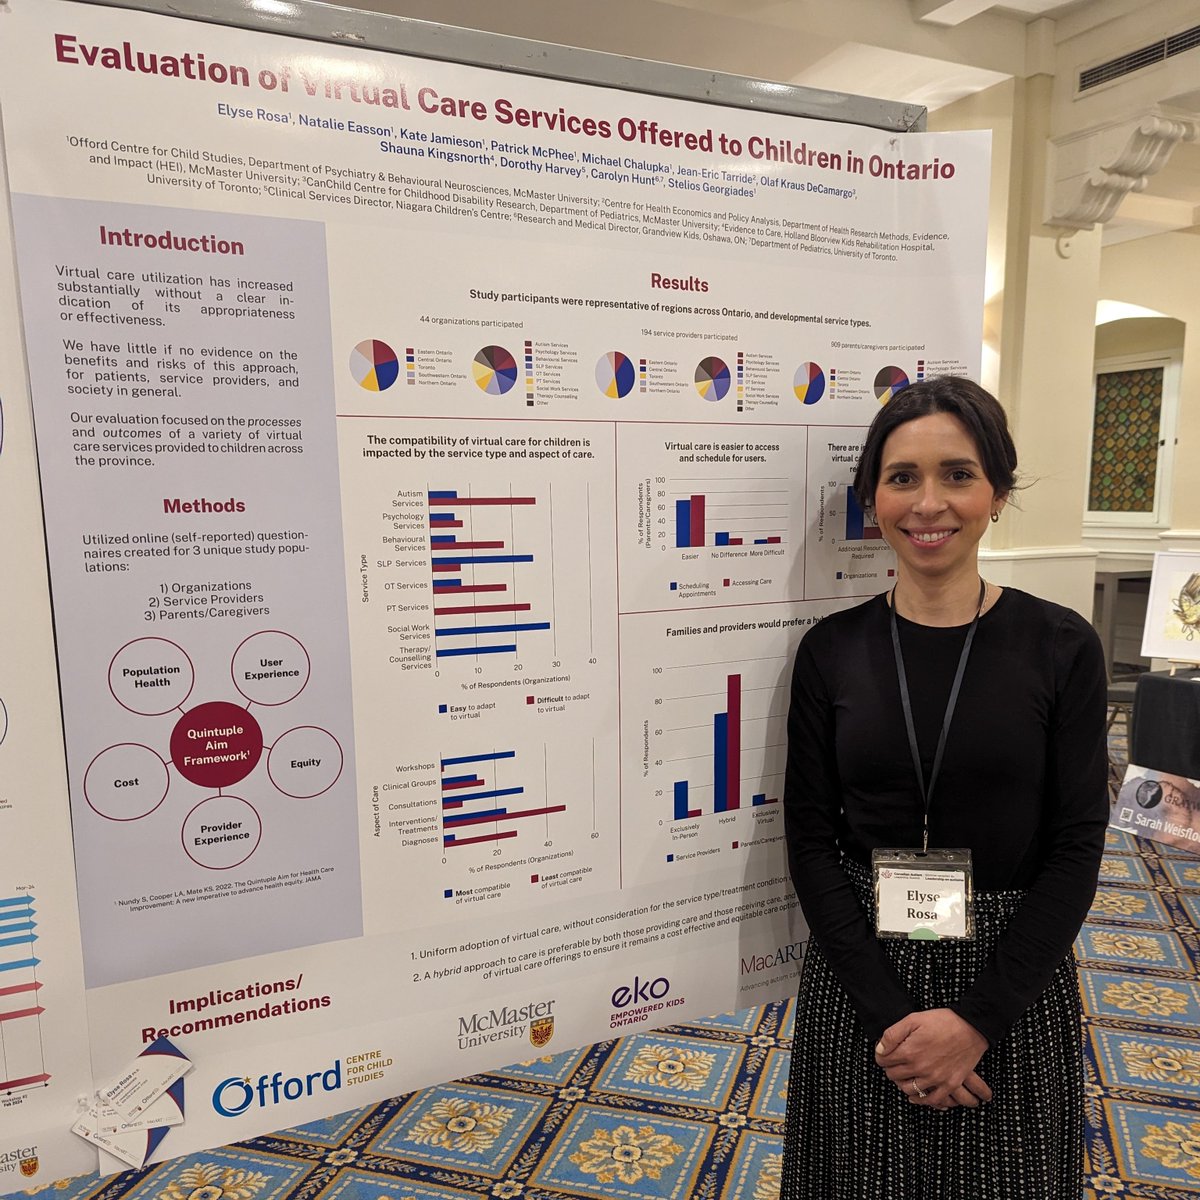 🤝 MacART's colleague Dr. Elyse Rosa with the ASD Team (@OffordCentre) is presenting her poster at #CALS2024, titled, 'Evaluation of Virtual Care Services Offered to Children in Ontario'!

This project involves MacART members Drs. Jean-Eric Tarride, @DevPeds, & @SteliosHG.